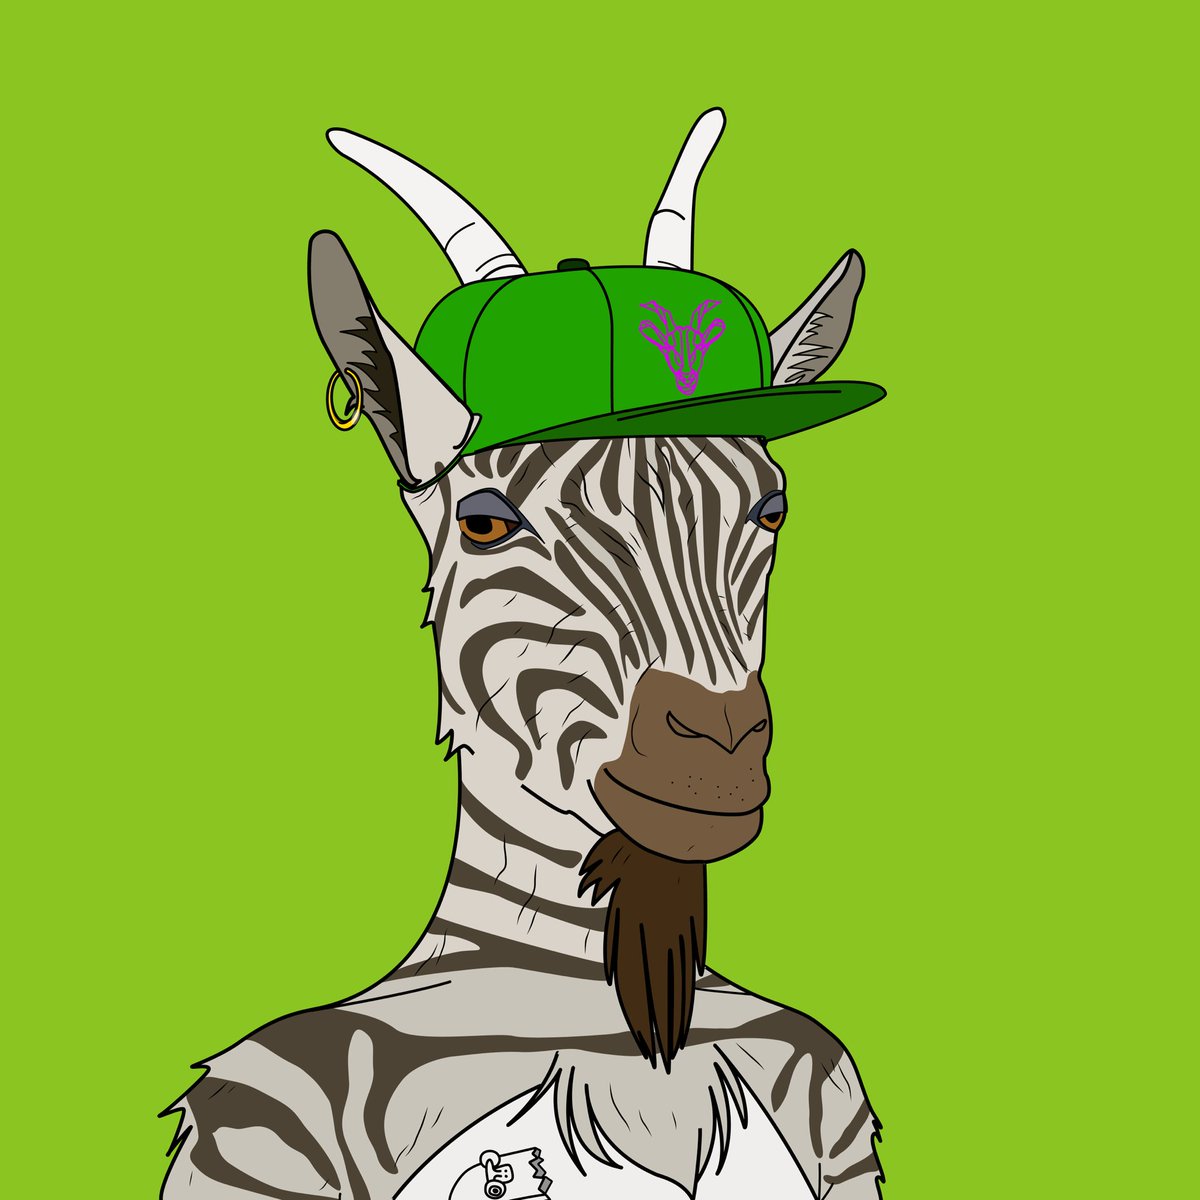 @adaGOATS @adazebras what even is GoatTribe?  They ain’t got sh*t on us! #ZebraTribe 4 Life!